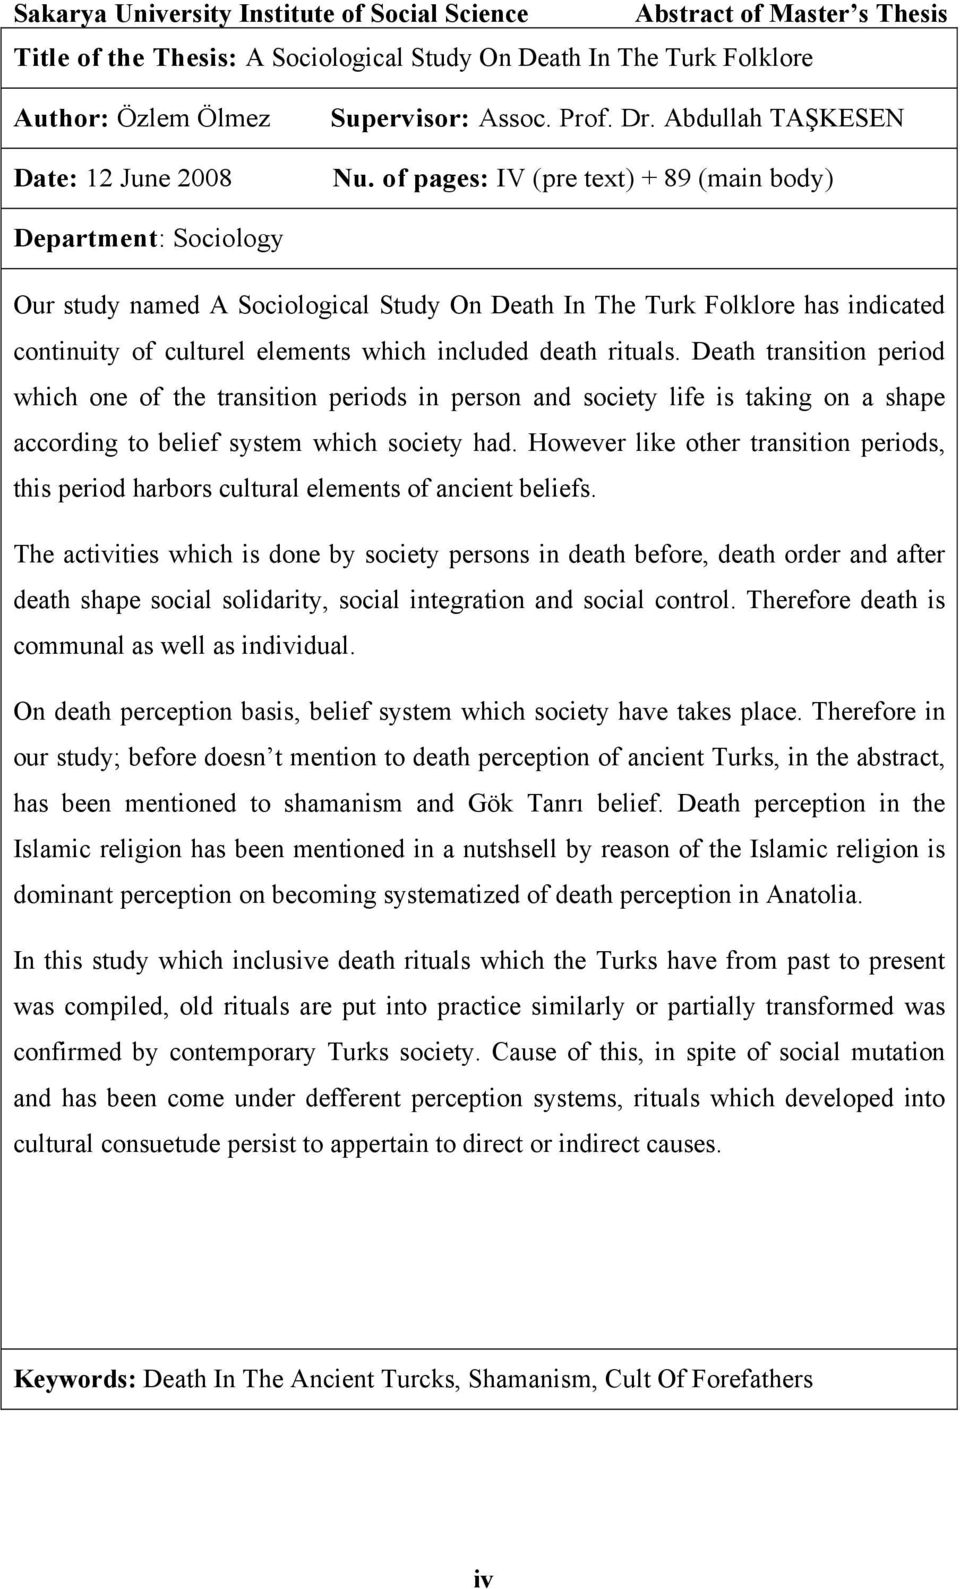 of pages: IV (pre text) + 89 (main body) Department: Sociology Our study named A Sociological Study On Death In The Turk Folklore has indicated continuity of culturel elements which included death